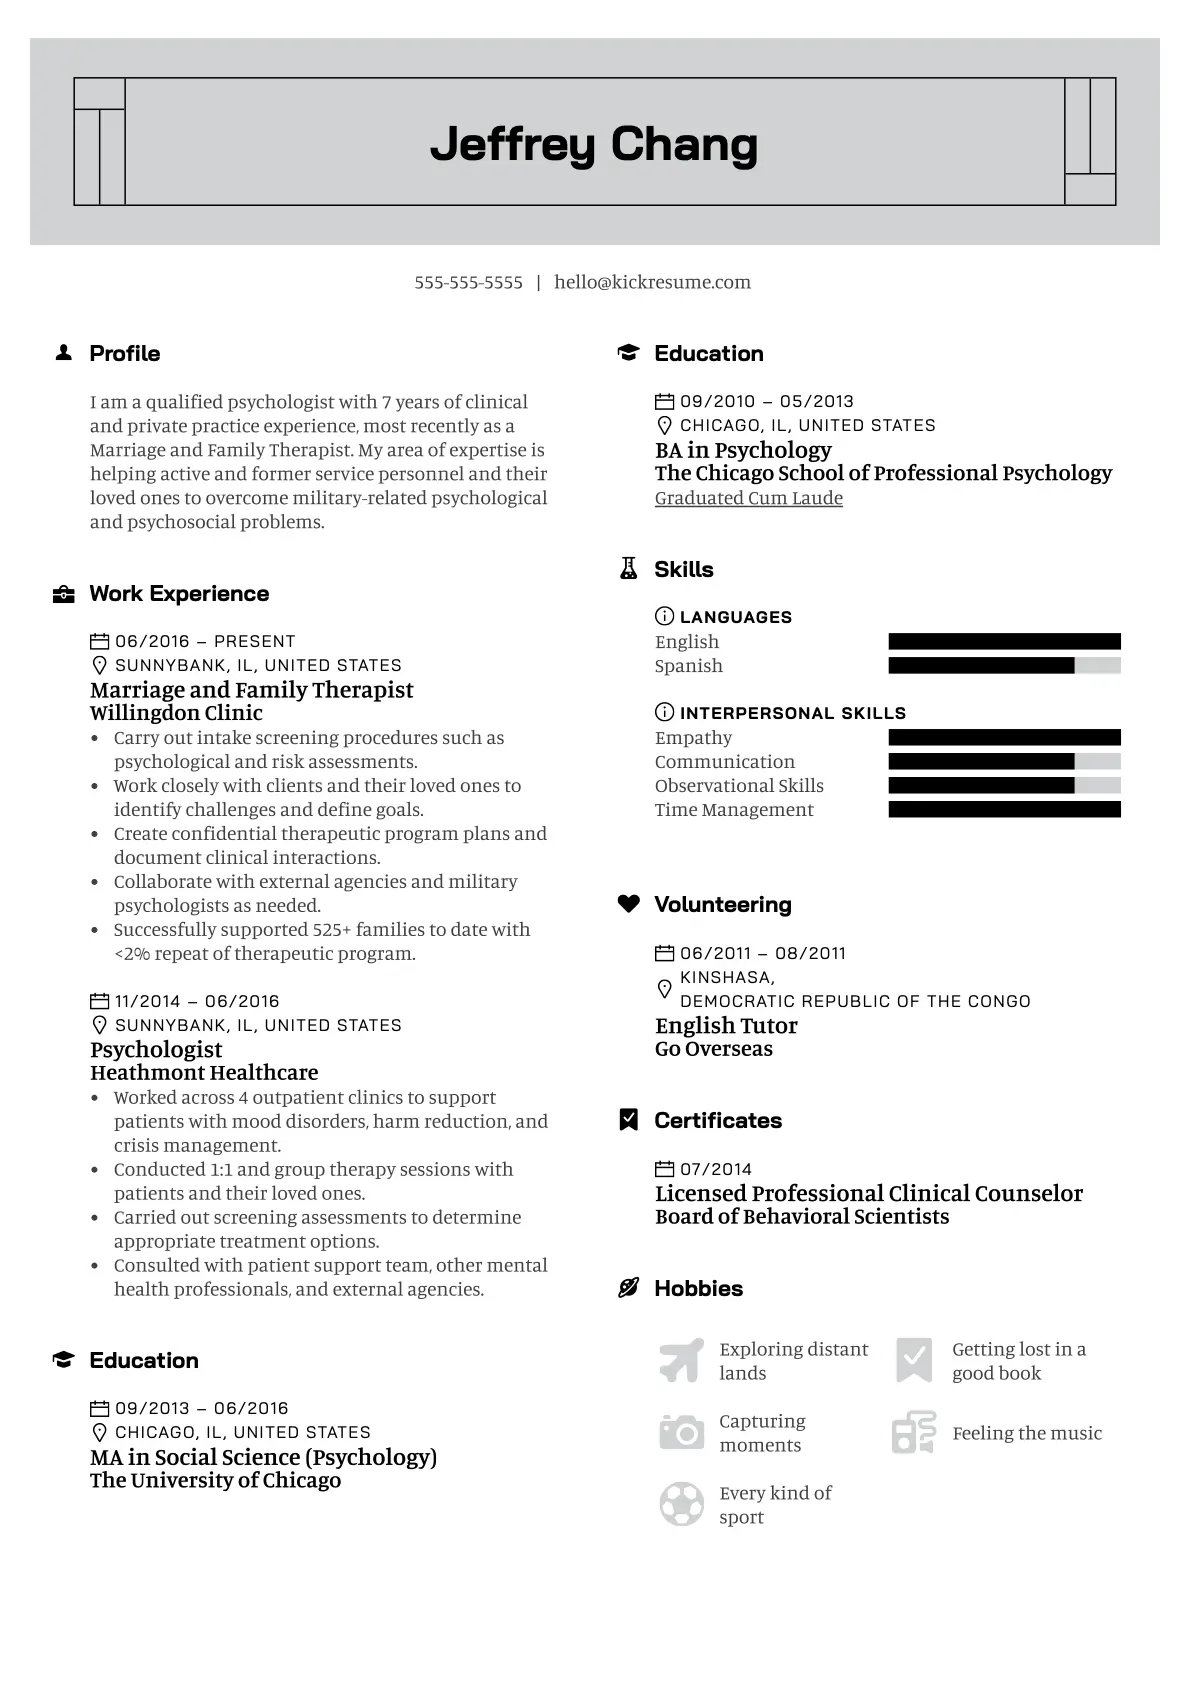 Marriage and Family Therapist resume sample